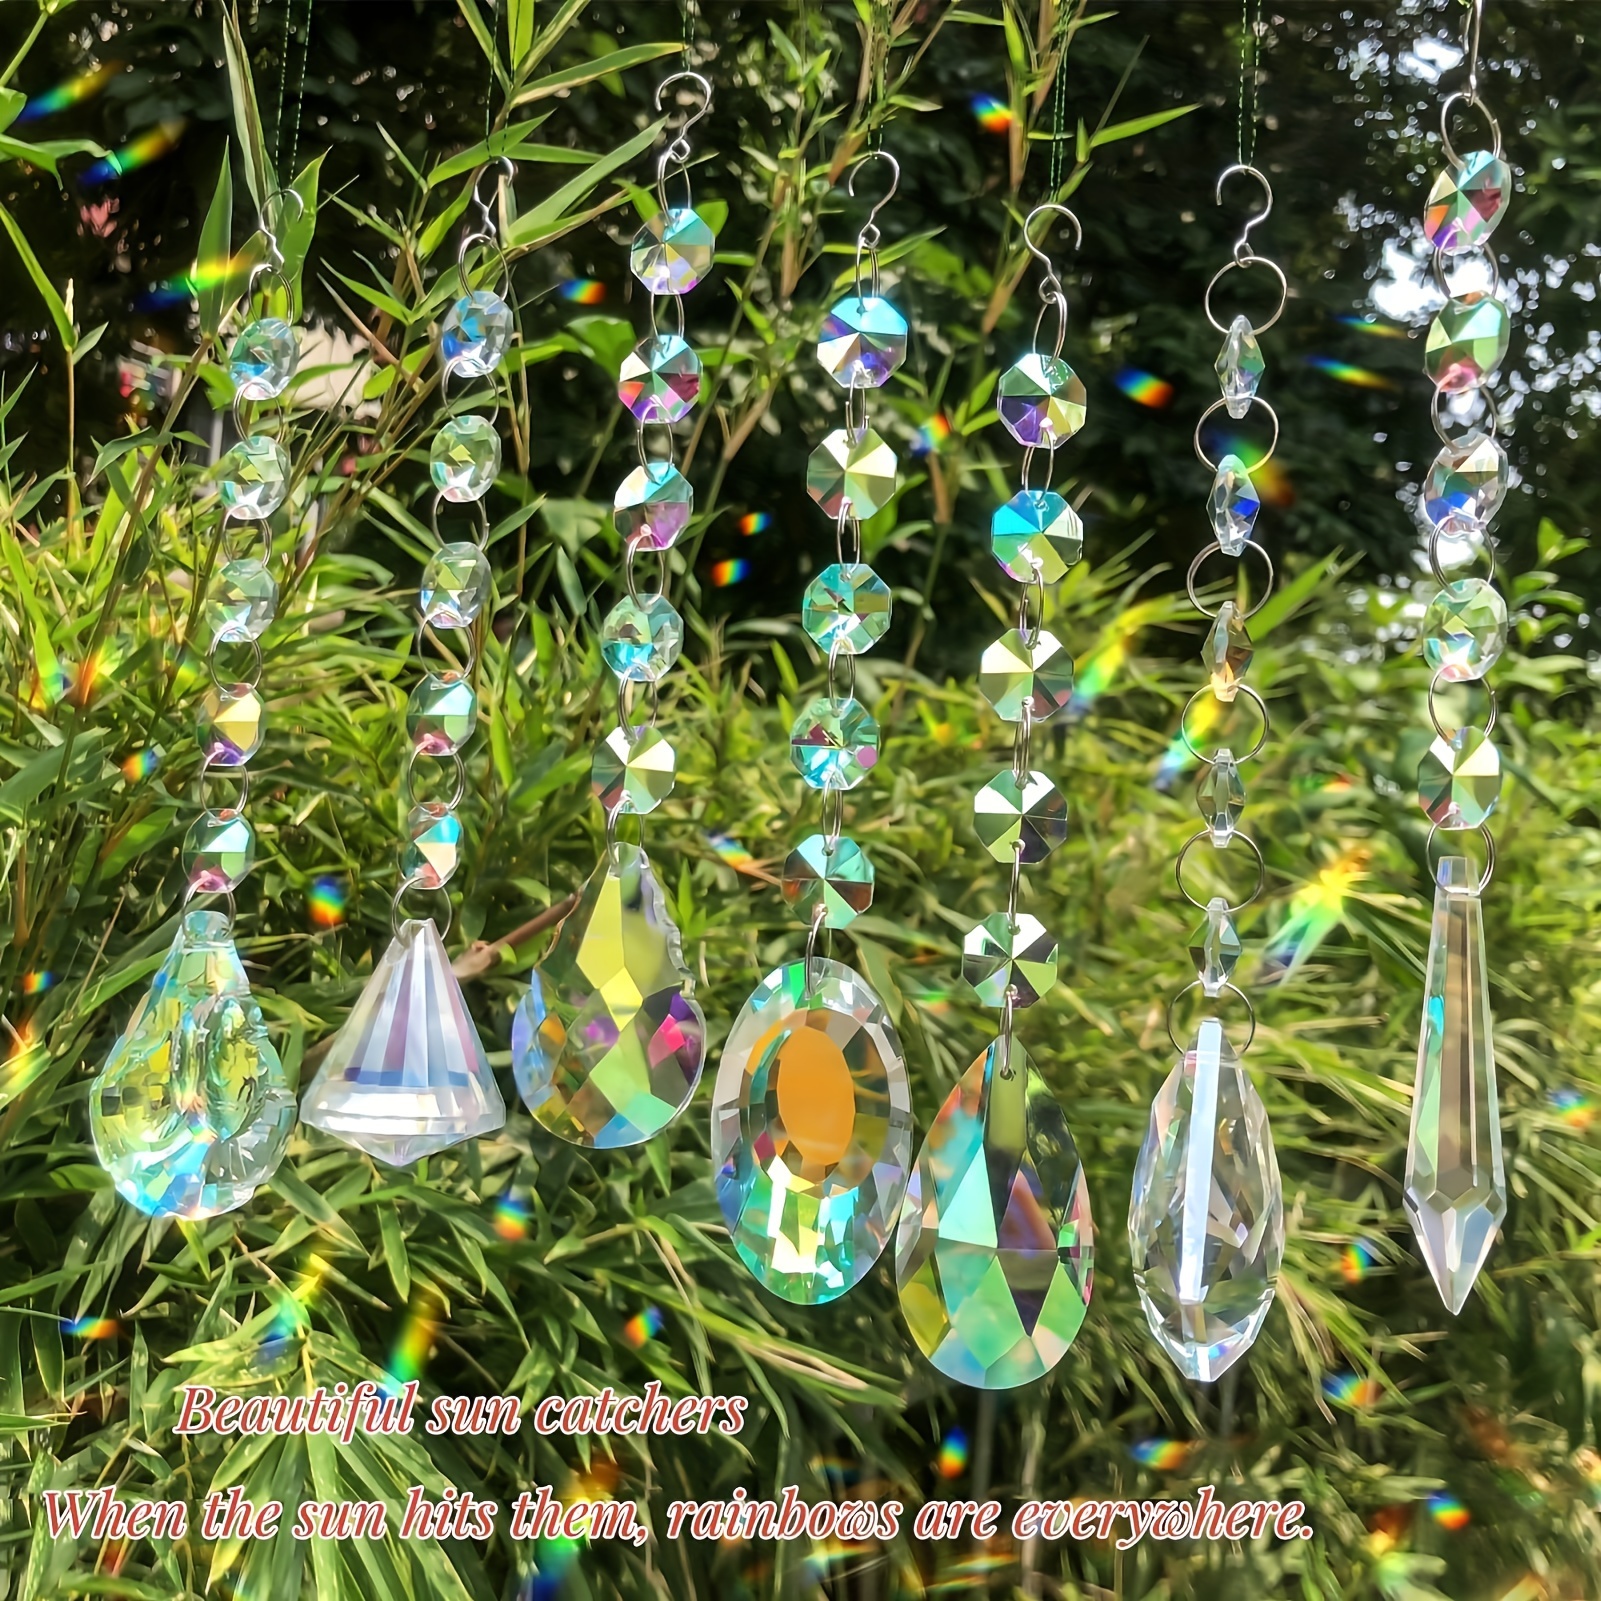 Sun Catchers with Crystals, 7 Pcs Hanging Crystals Suncatchers for Windows,  Colored Crystals Prisms Glass Pendant Suncatchers Beads for Chandeliers